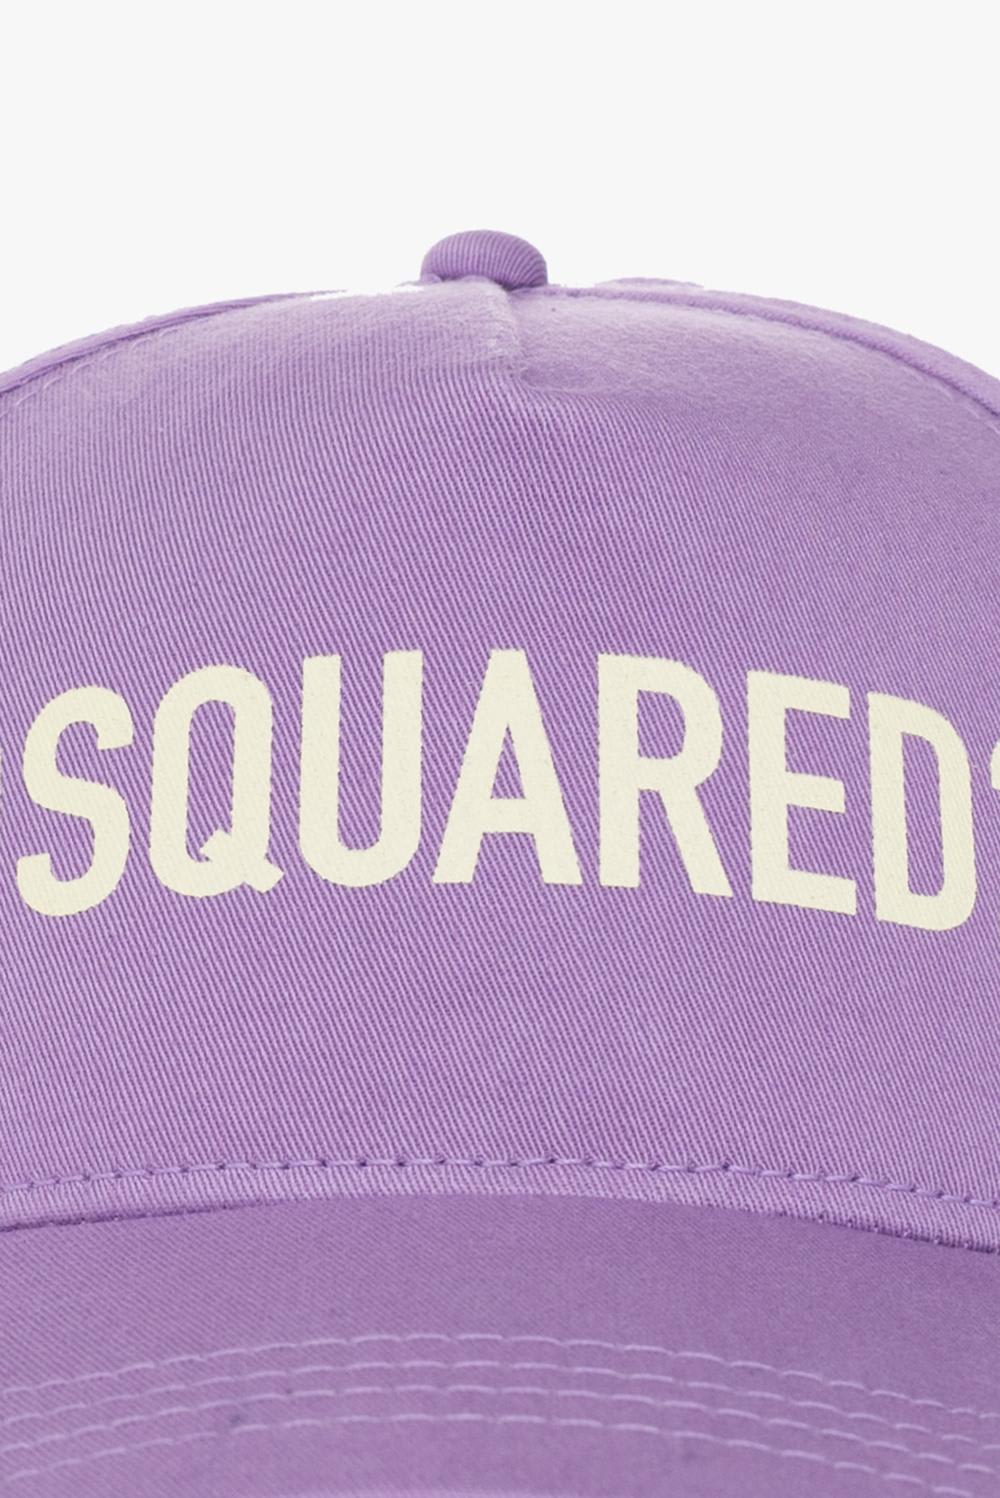 Shop Dsquared2 One Life One Planet Collection Baseball Cap In Purple